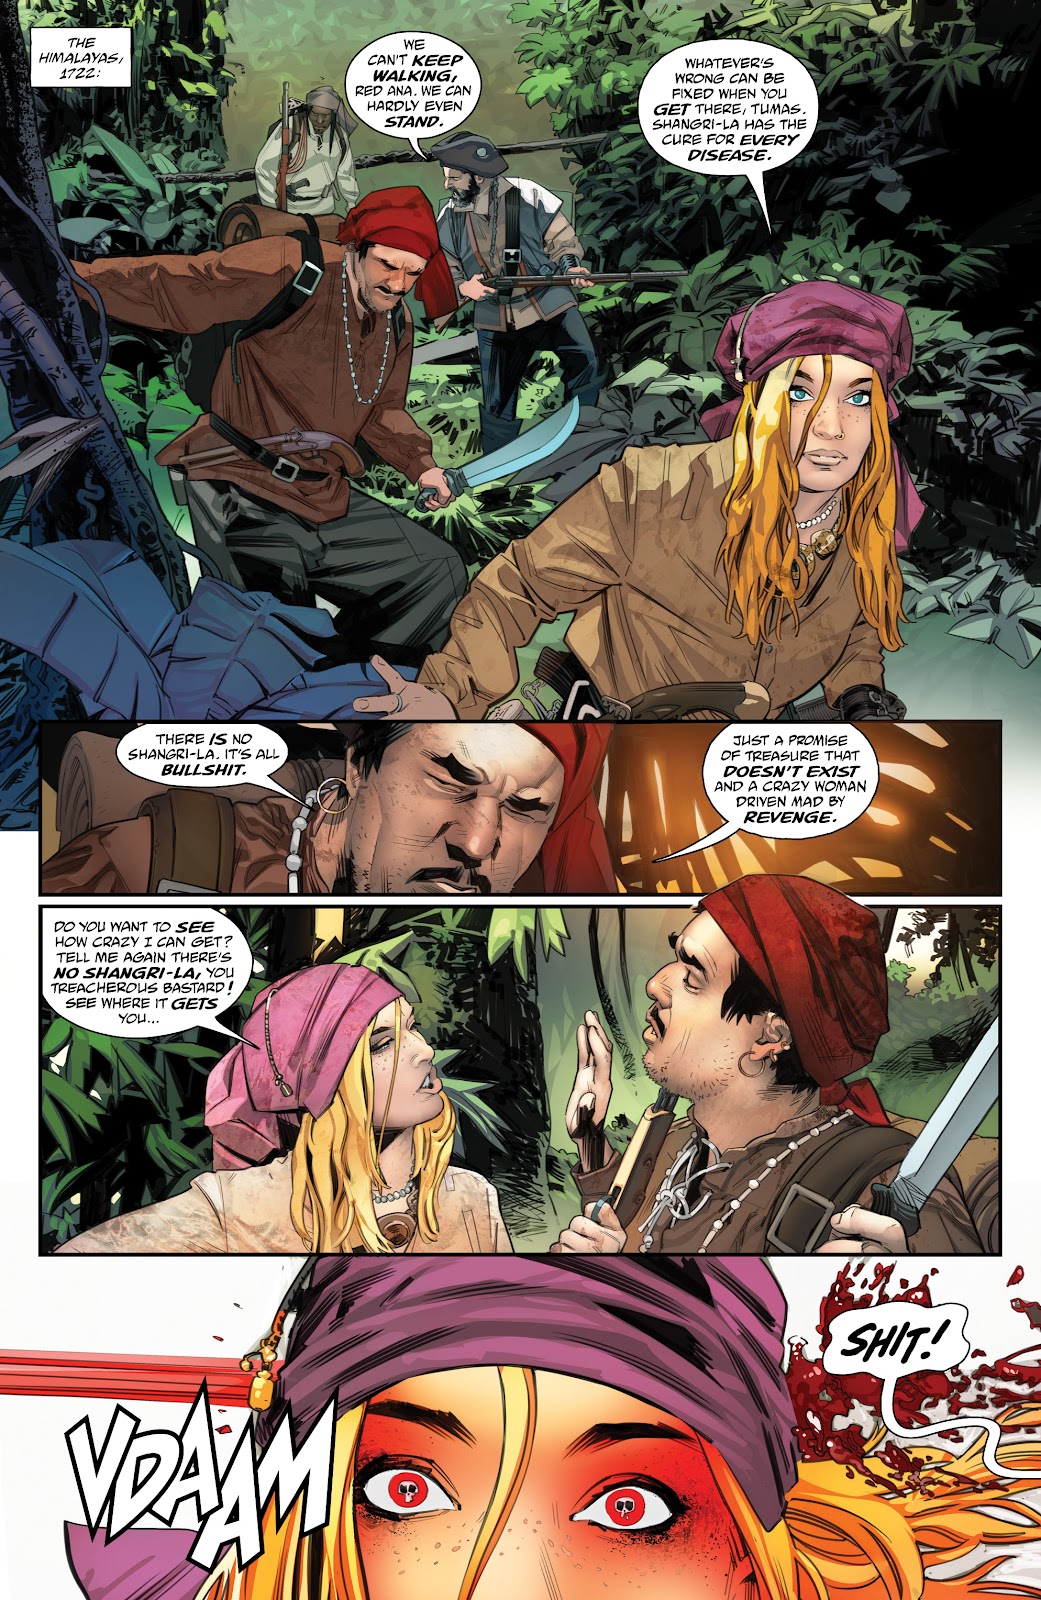 Prodigy: The Icarus Society issue 3 - Page 4